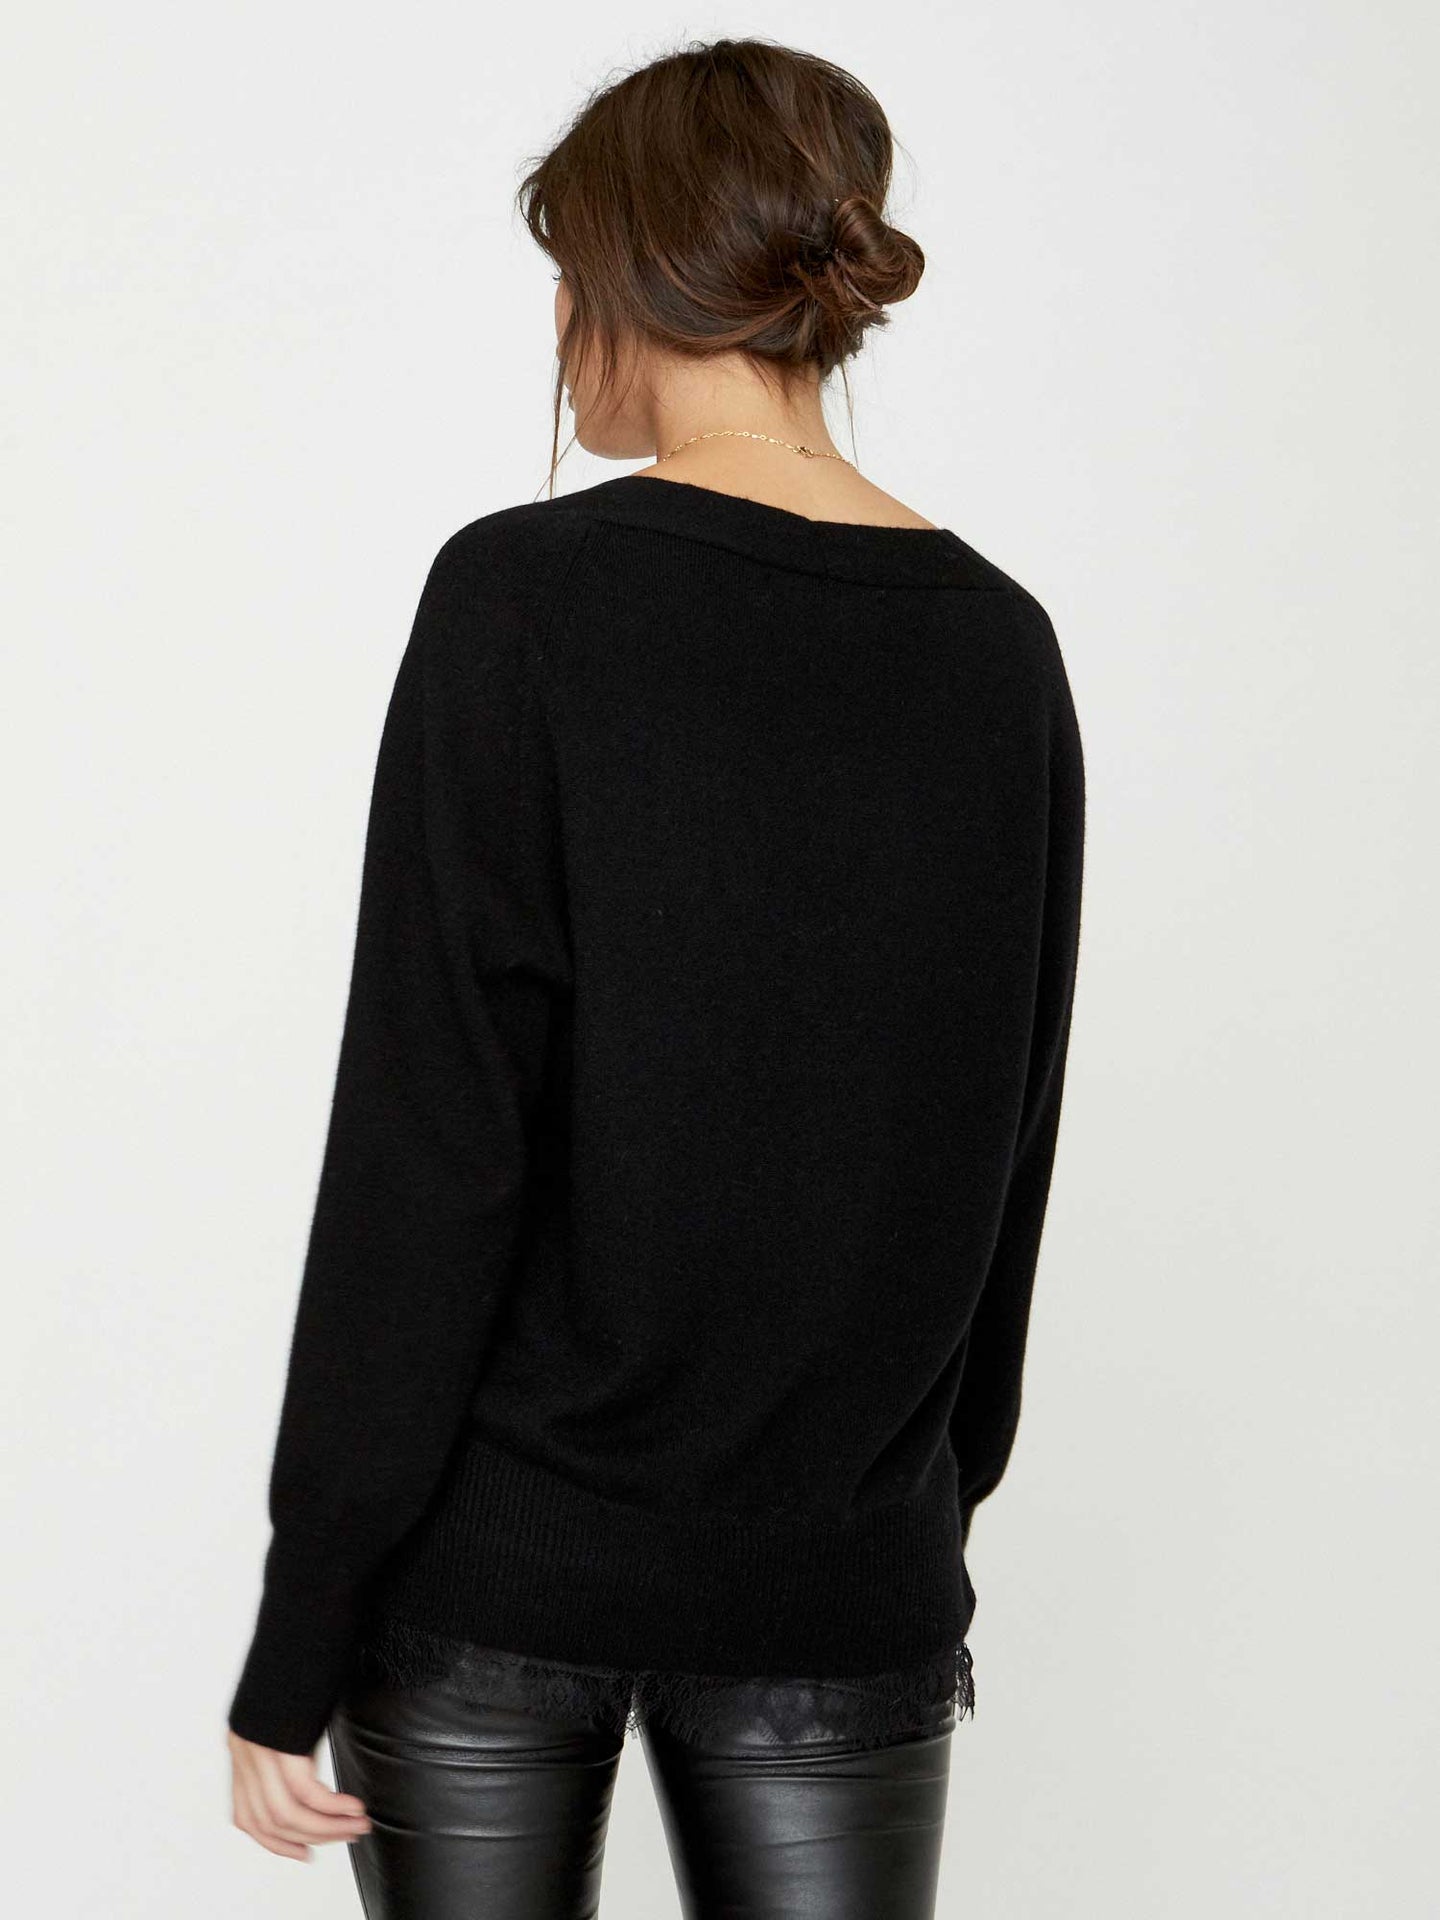 Women's Lace V-neck Layered Sweater in Black